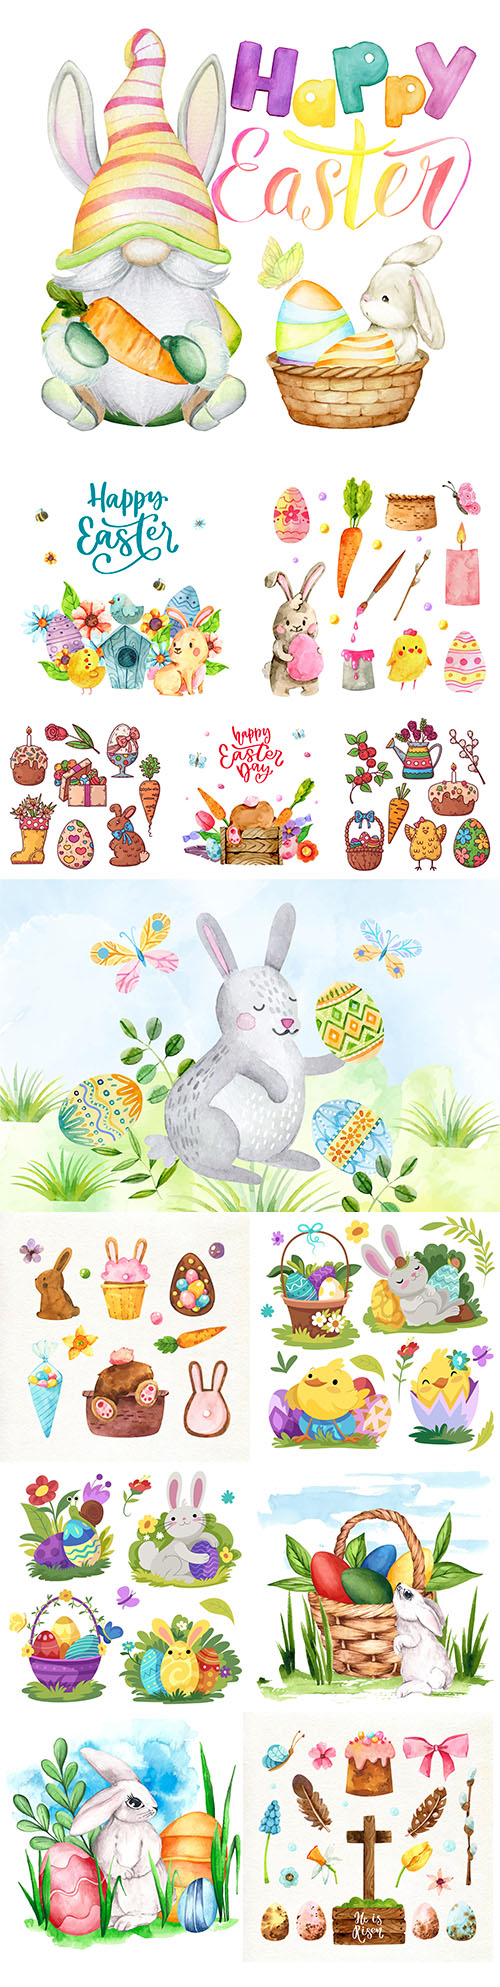 Happy Easter collection of watercolor illustrations and elements
